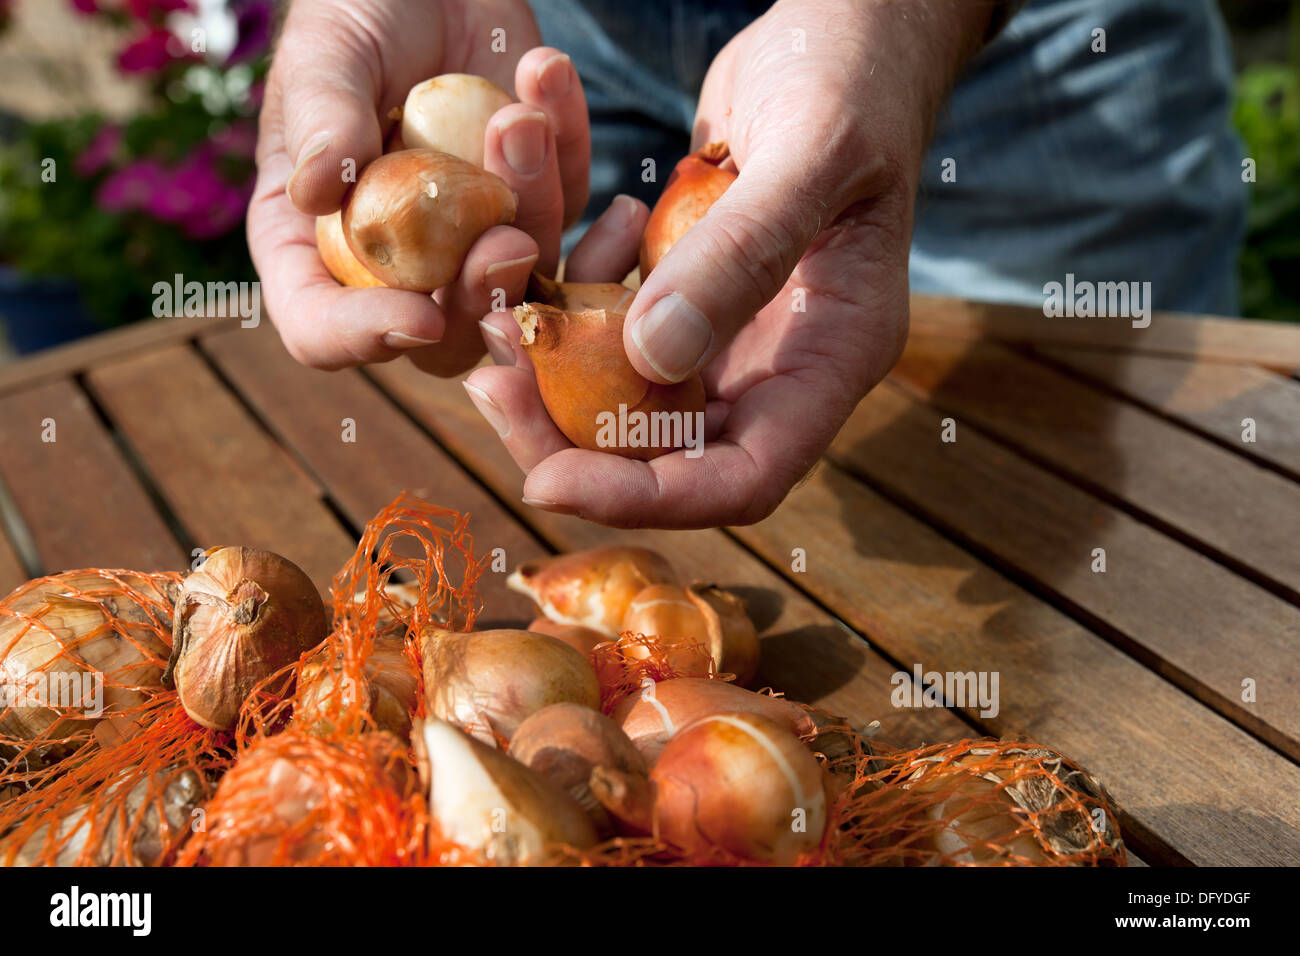 Close up of Man hands holding and sellecting choosing tulip bulbs ready for planting in the garden England UK United Kingdom GB Great Britain Stock Photo